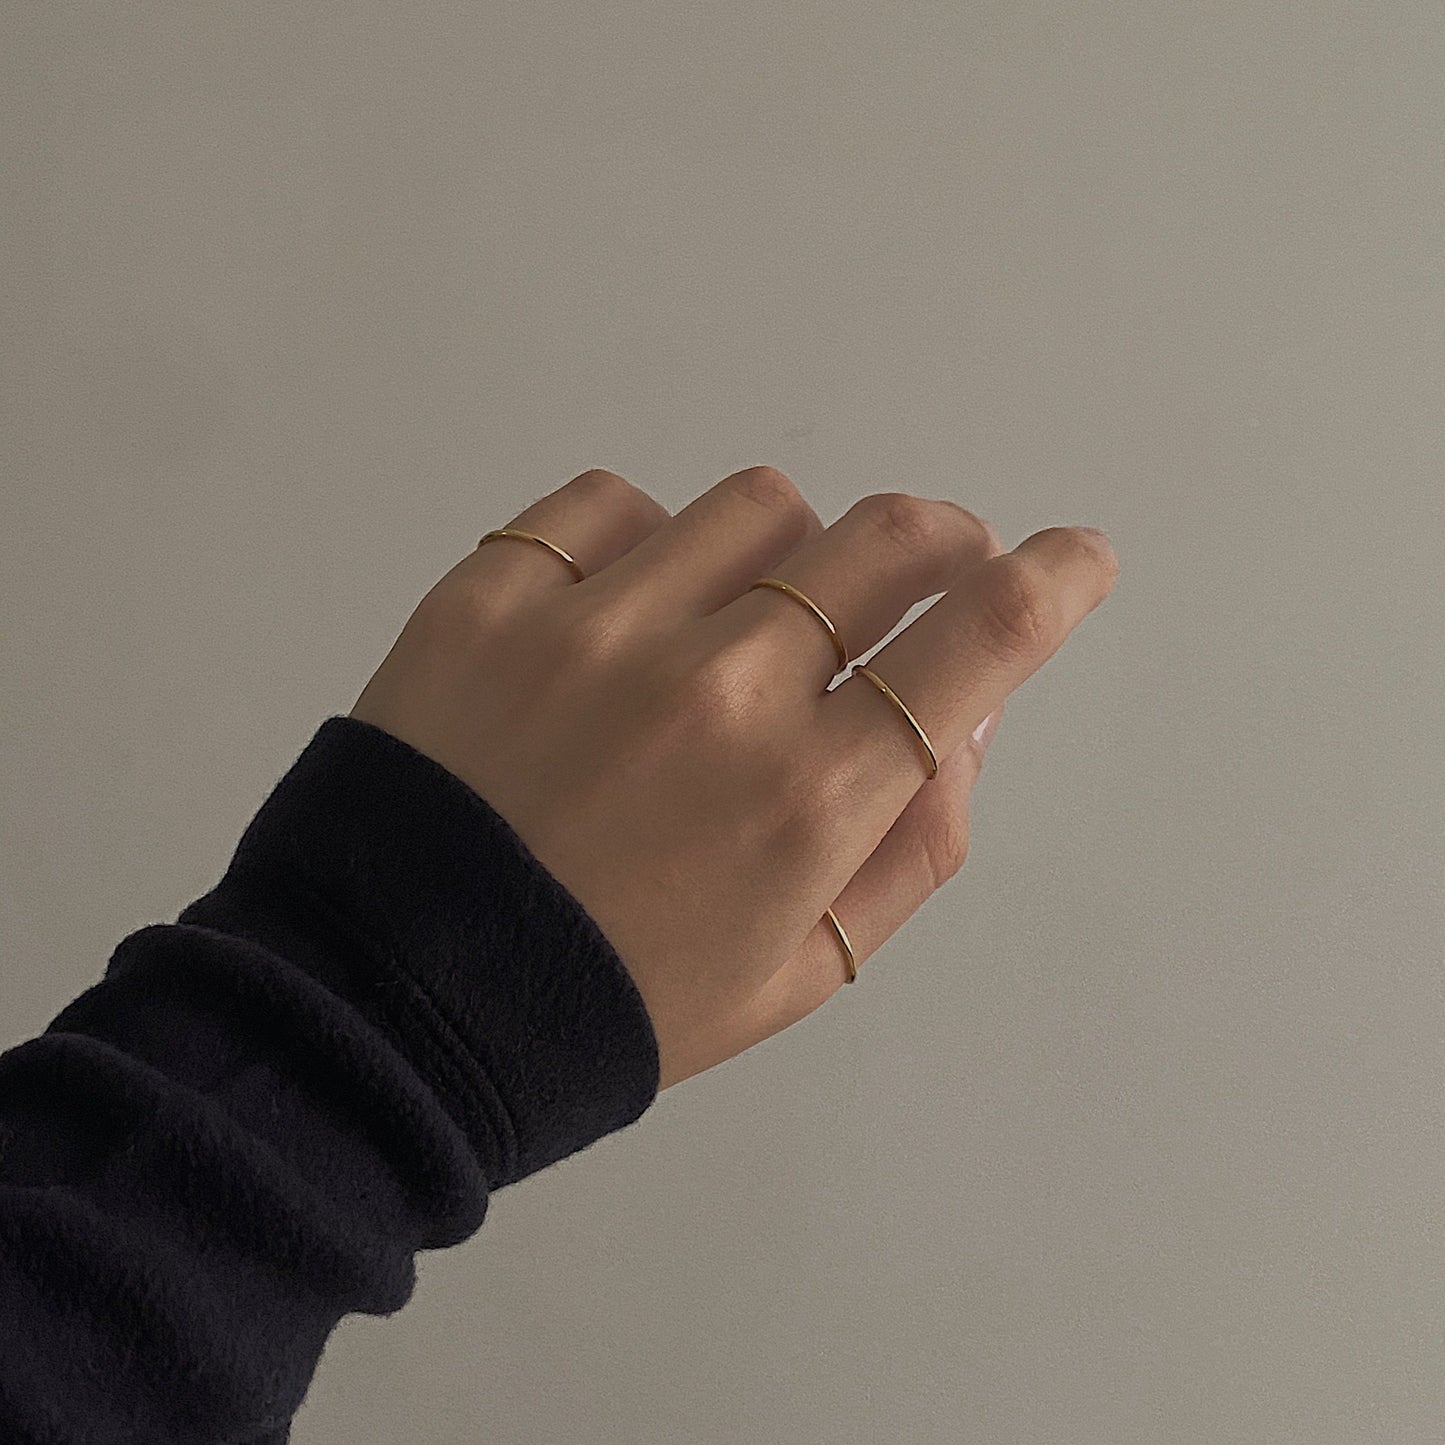 Thin Ring in Gold